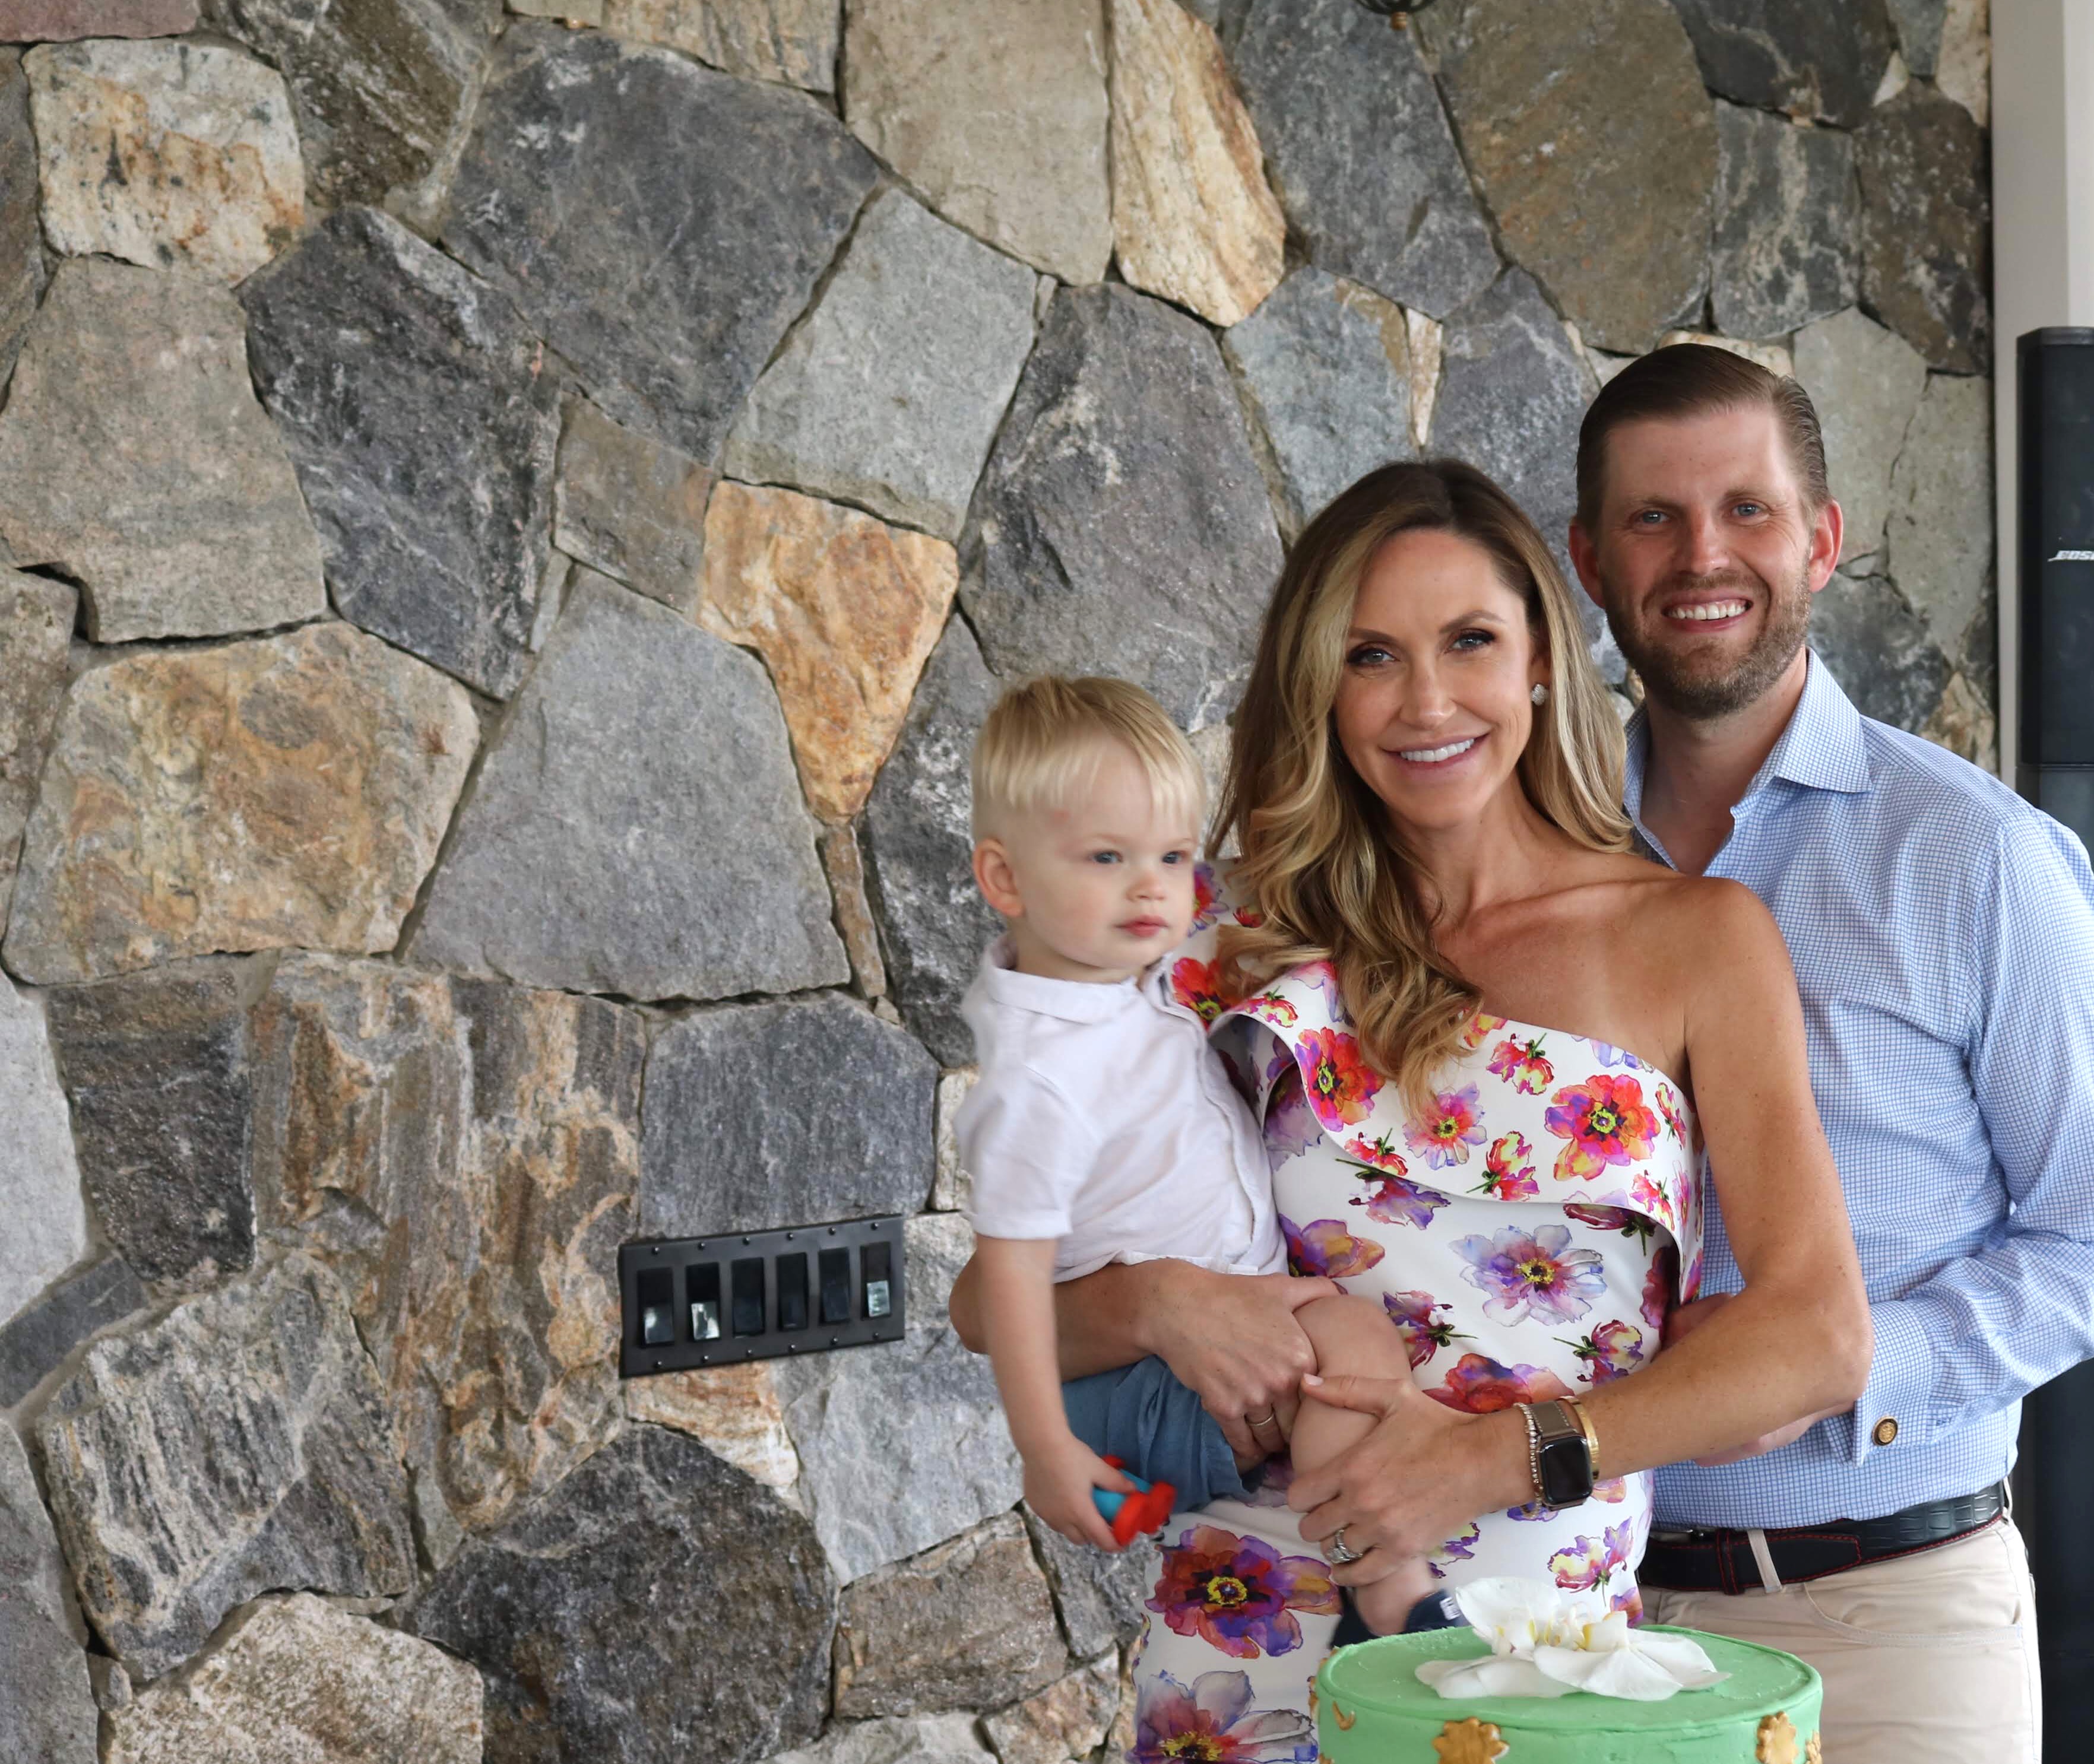 Mother's Day Q&A with Lara Trump